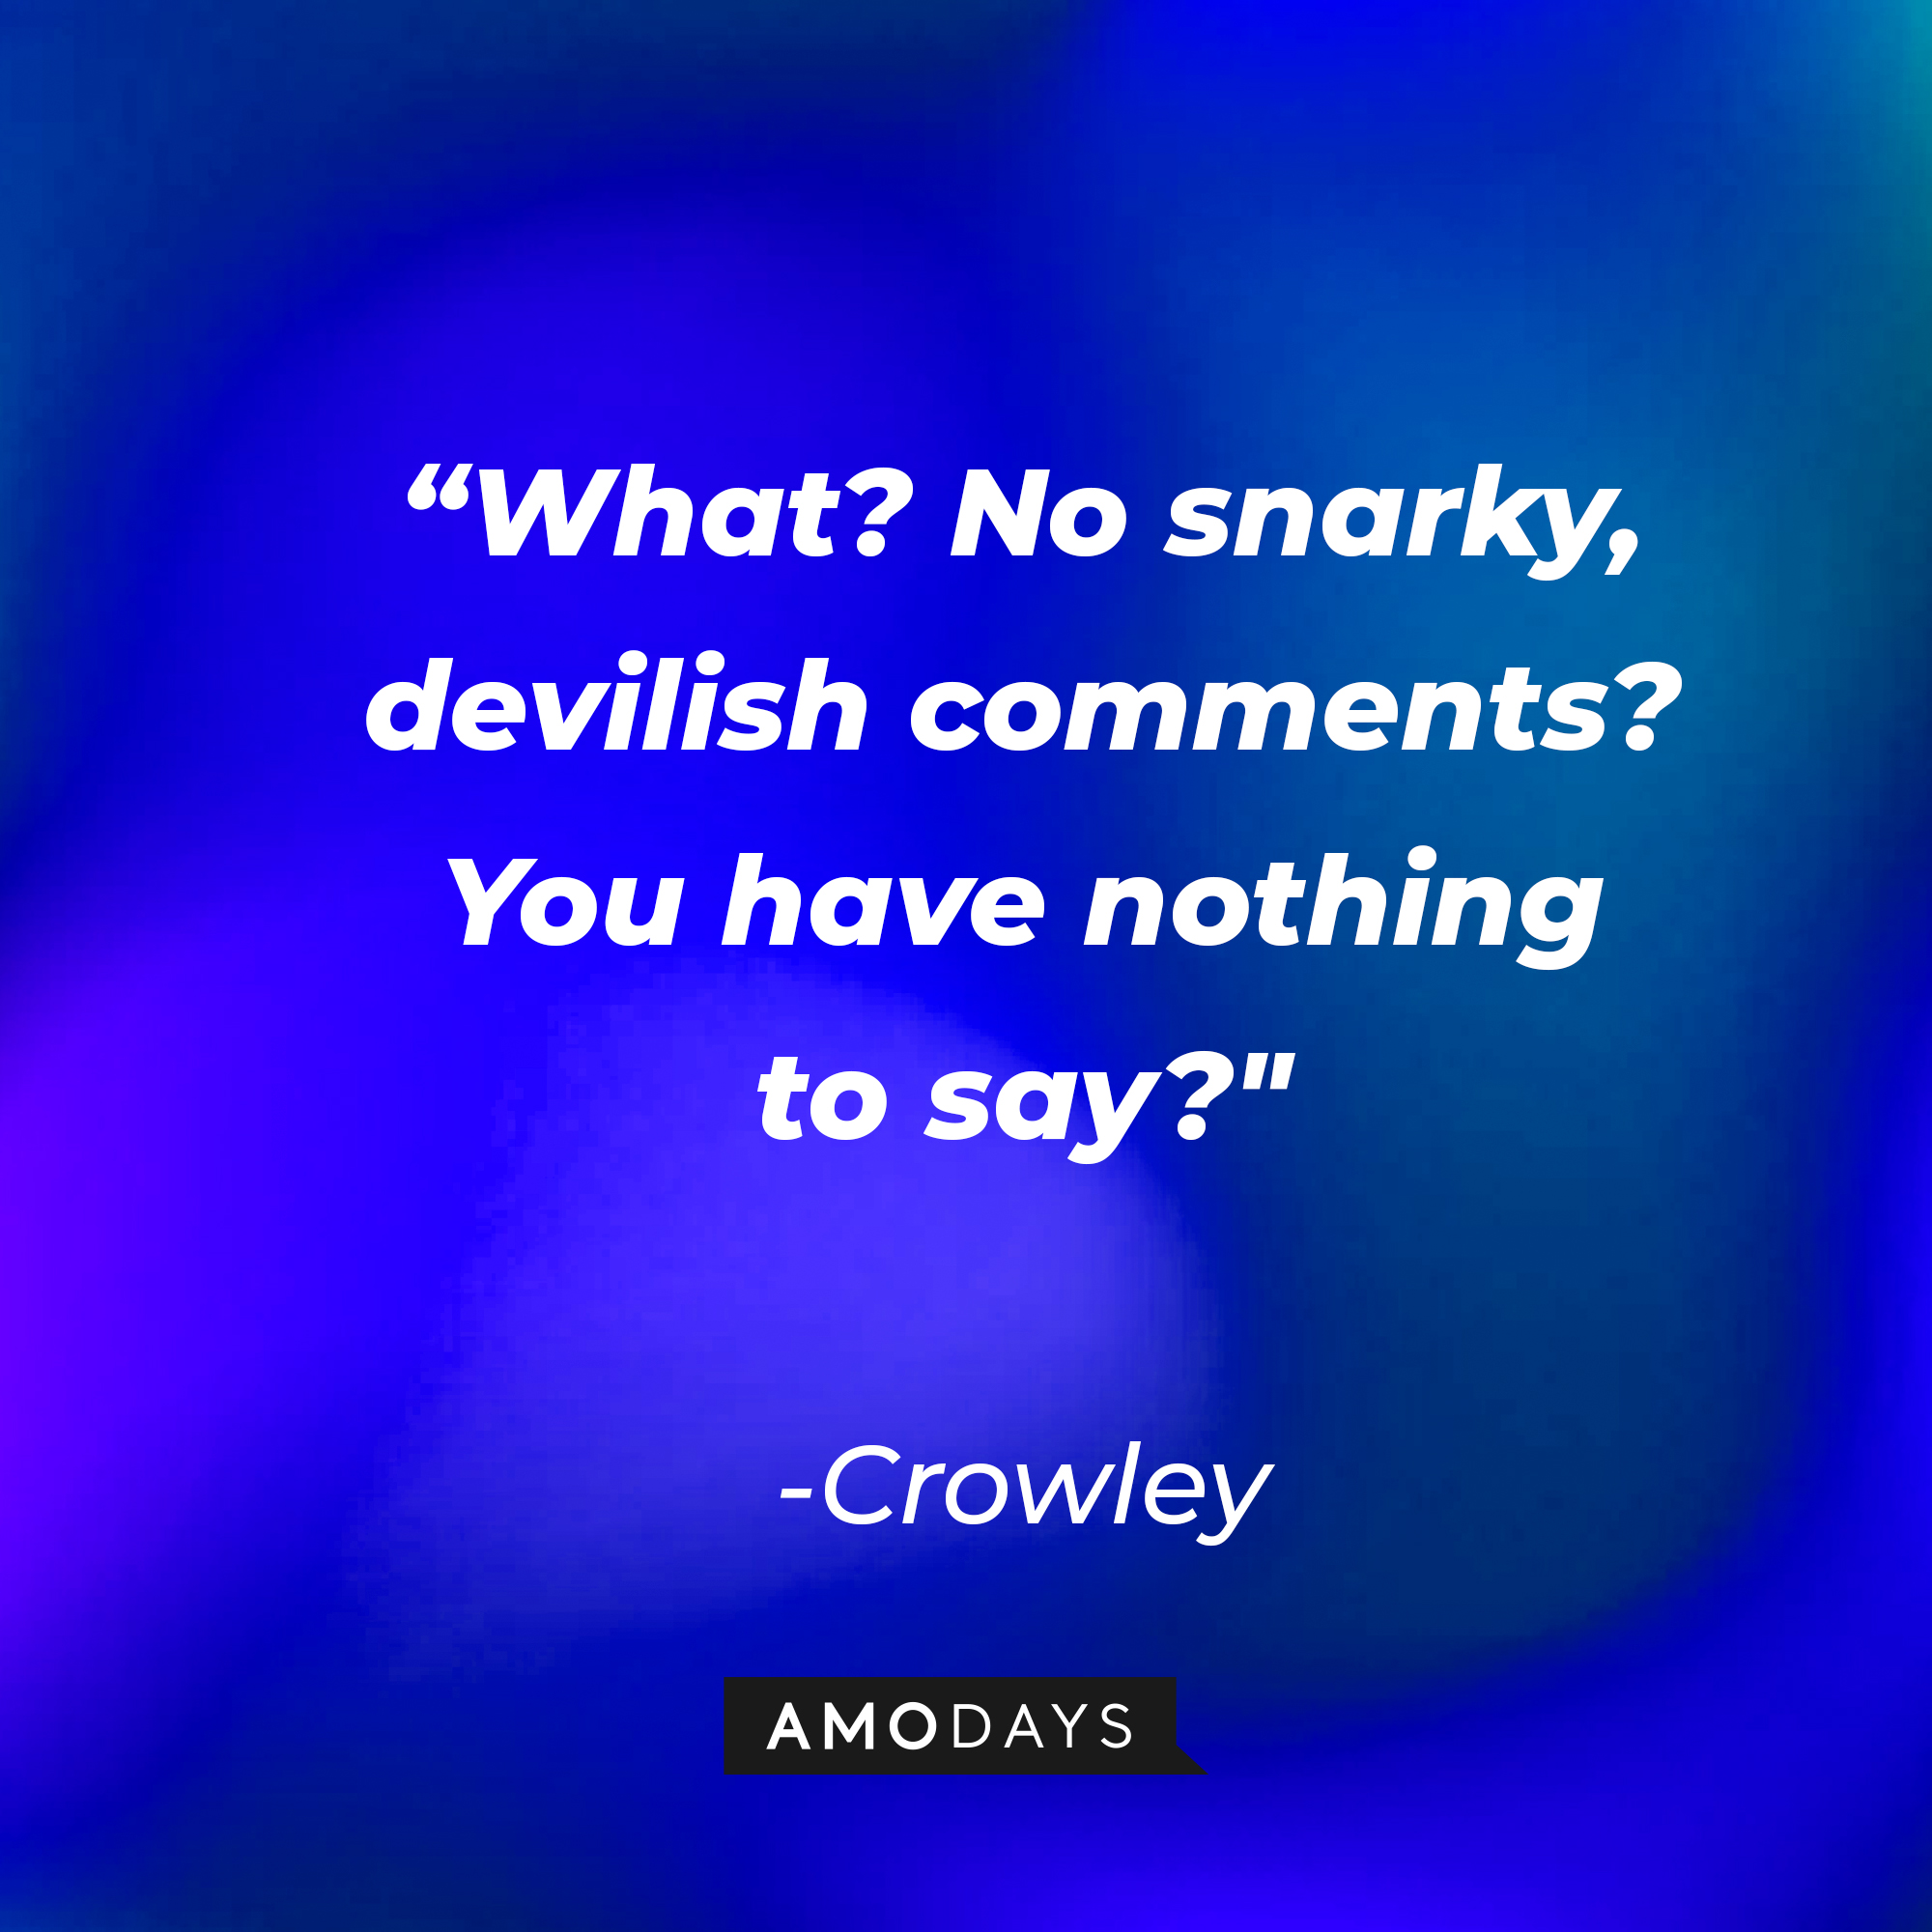 Crowley’s quote: “What? No snarky, devilish comments? You have nothing to say?" | Source: AmoDays